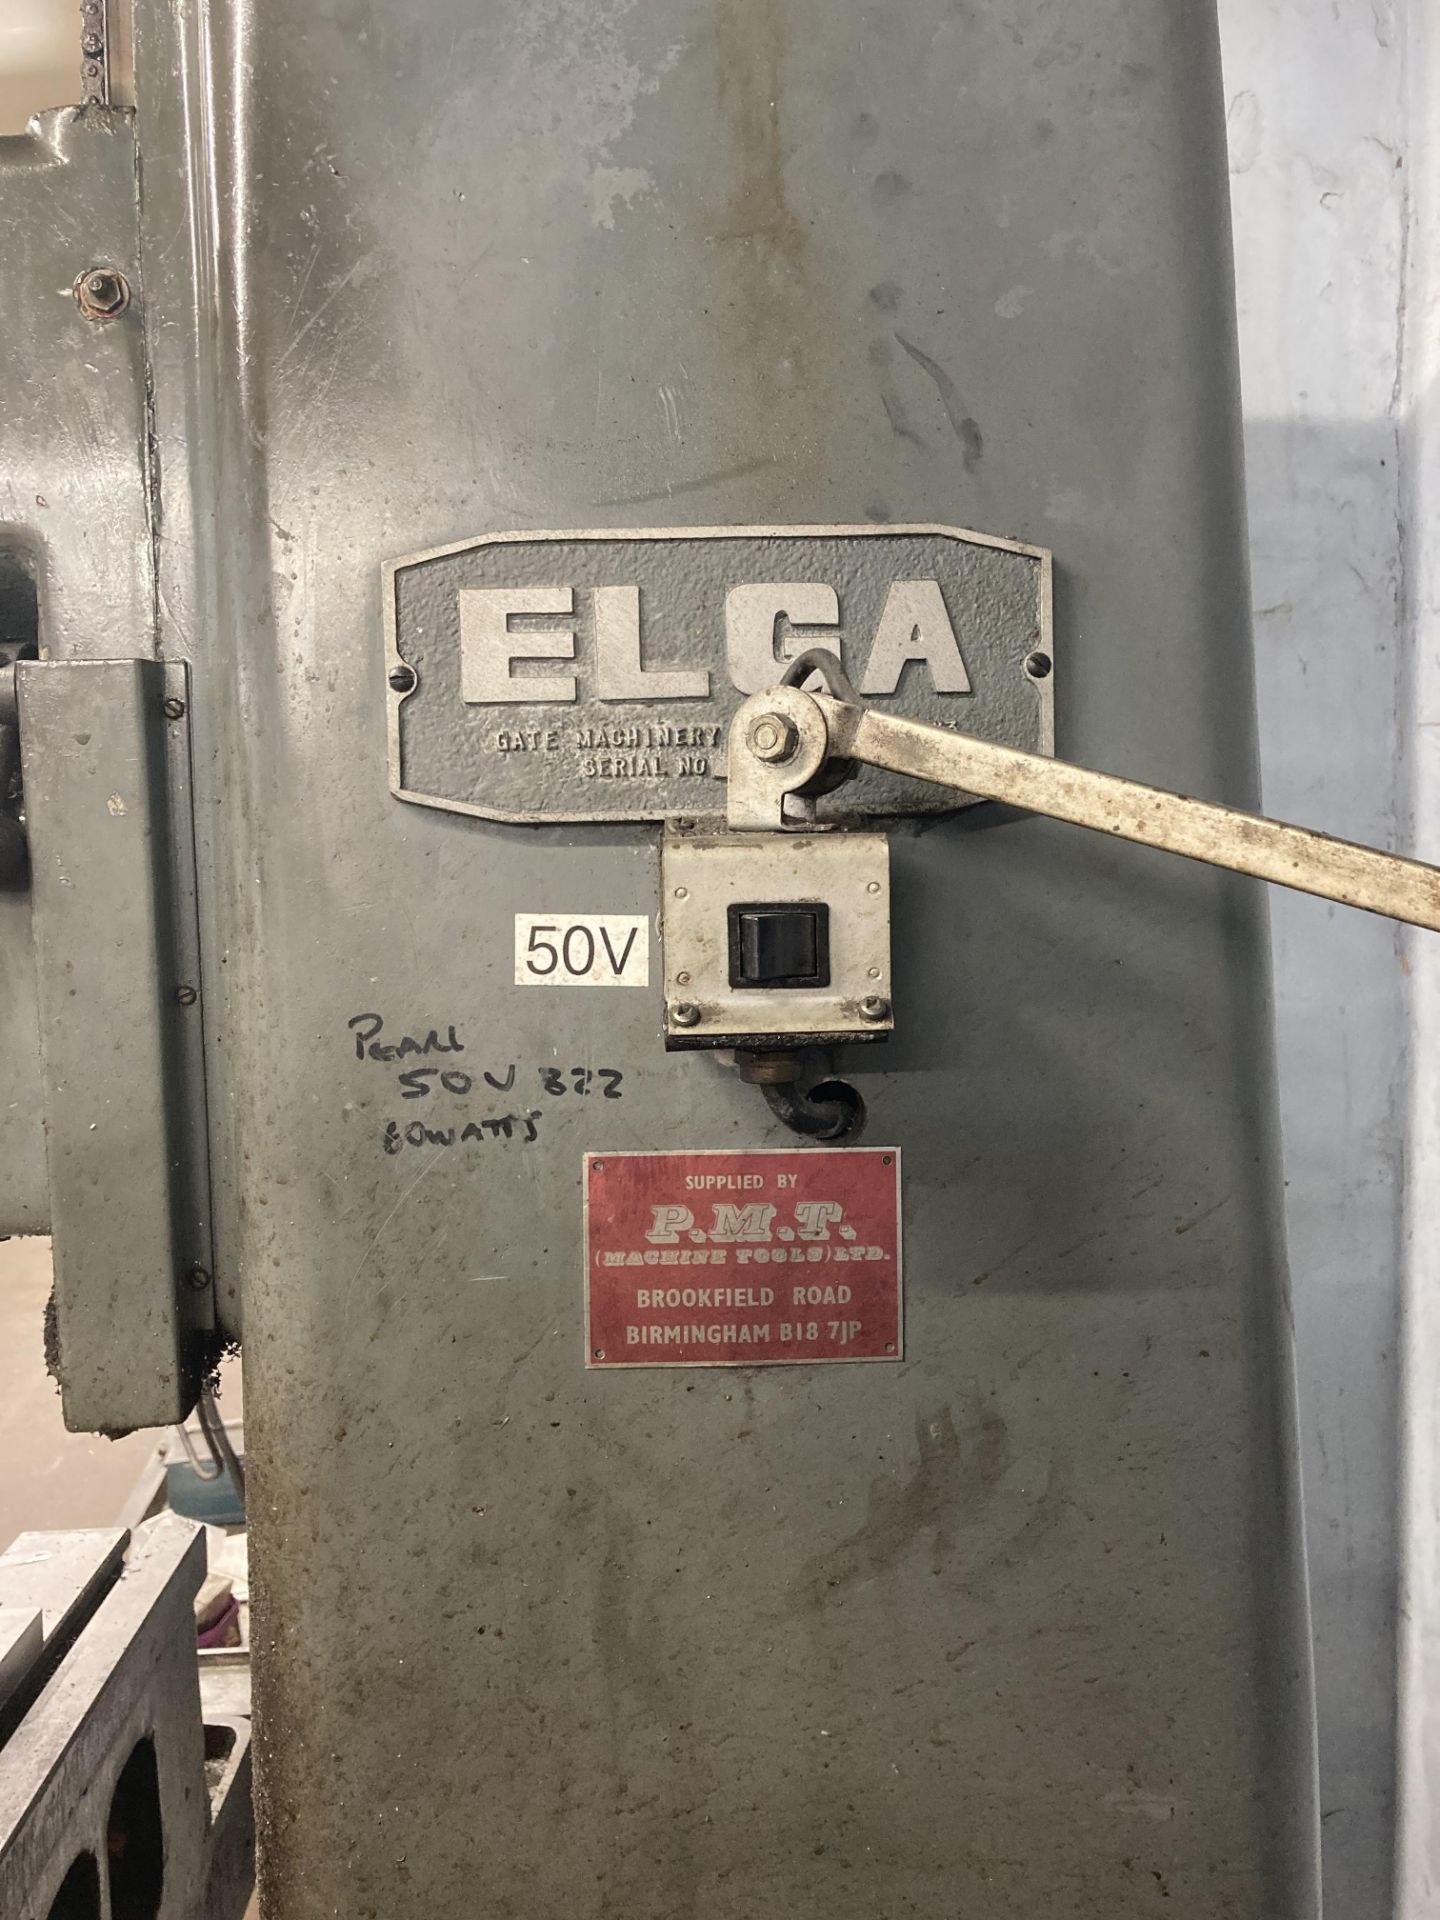 Elga vertical boring machine, Serial No. 5671-25, table size 600mm x 300mm, speeds 95-2070 with - Image 5 of 6